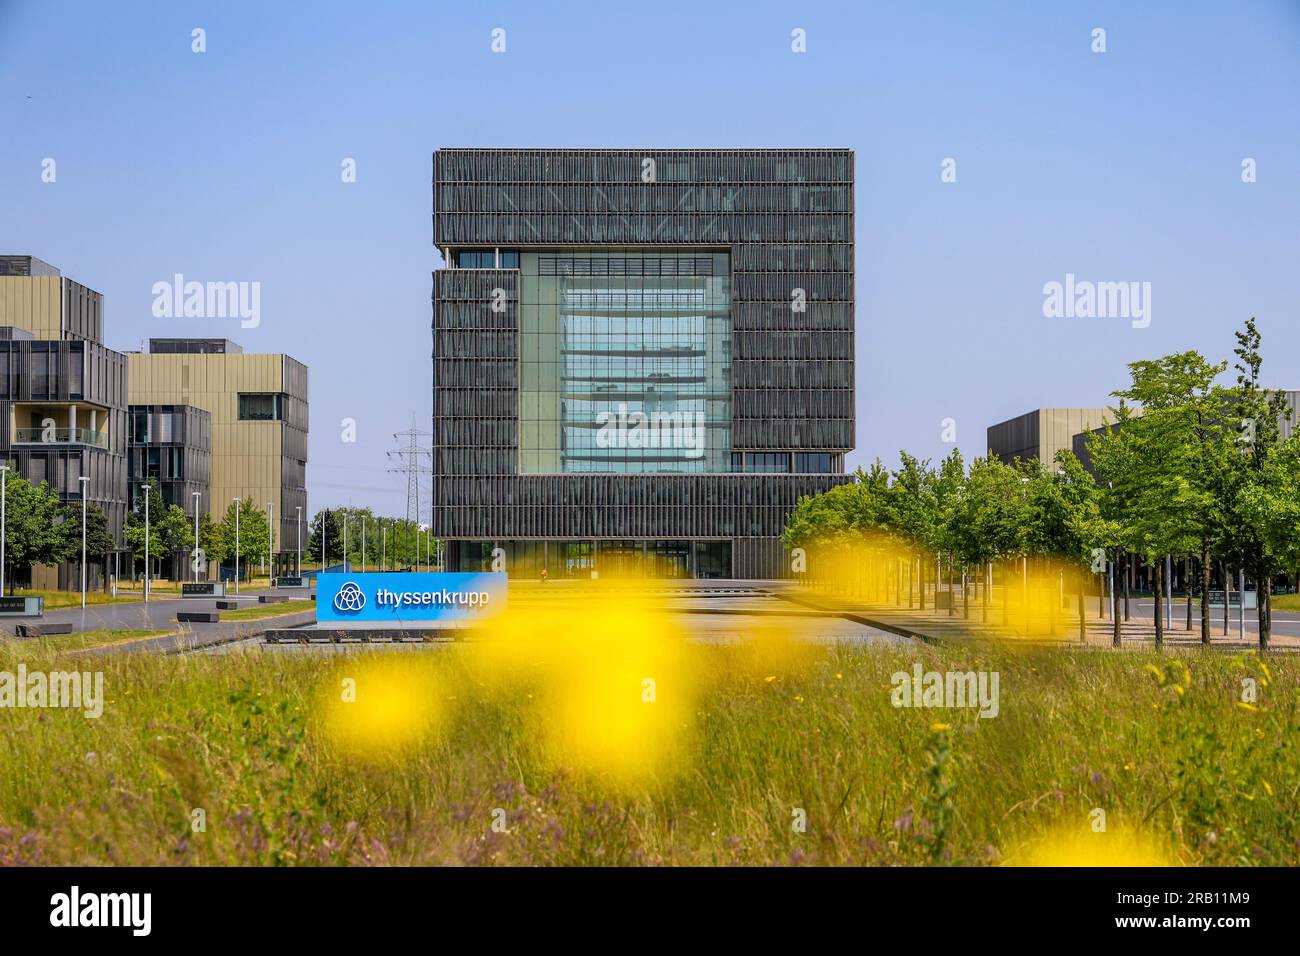 Essen, North Rhine-Westphalia, Germany - ThyssenKrupp, company logo in front of the headquarters. thyssenkrupp AG is an industrial group with a focus on steel processing and Germany's largest steel producer Stock Photo